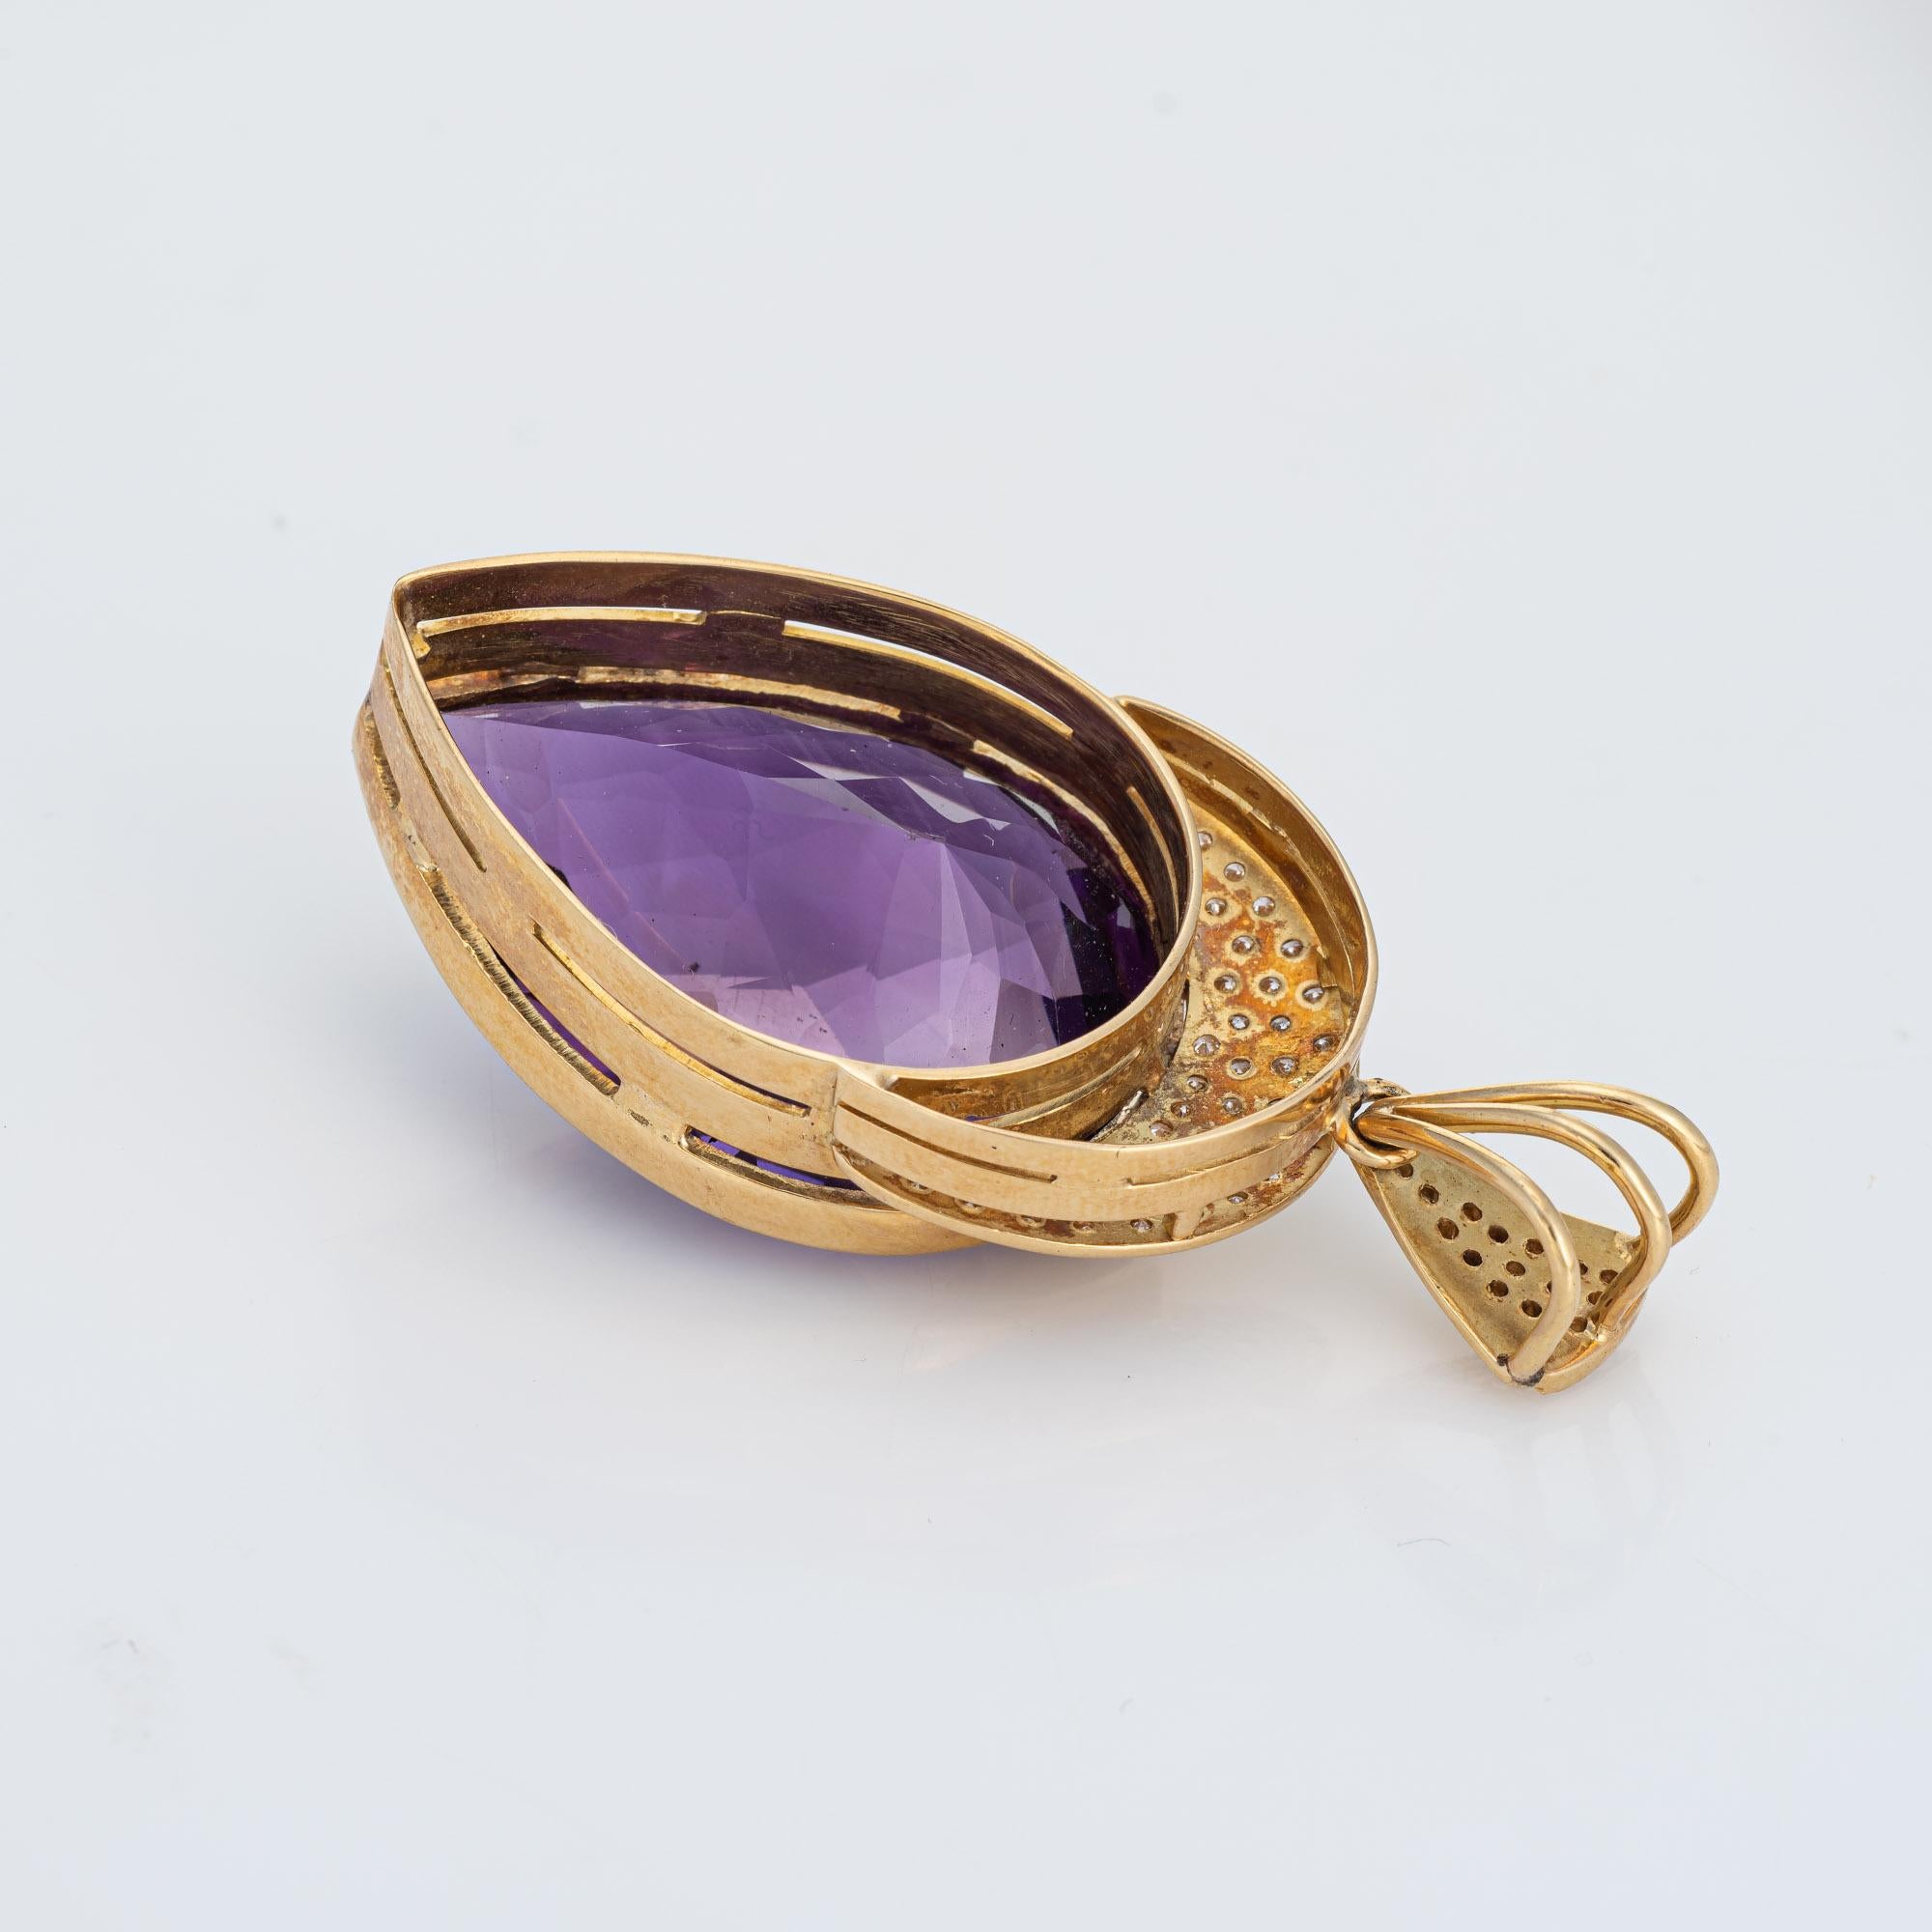 Huge 65ct Amethyst Pendant 14k Yellow Gold Diamond Pear Cut Vintage Jewelry In Good Condition For Sale In Torrance, CA